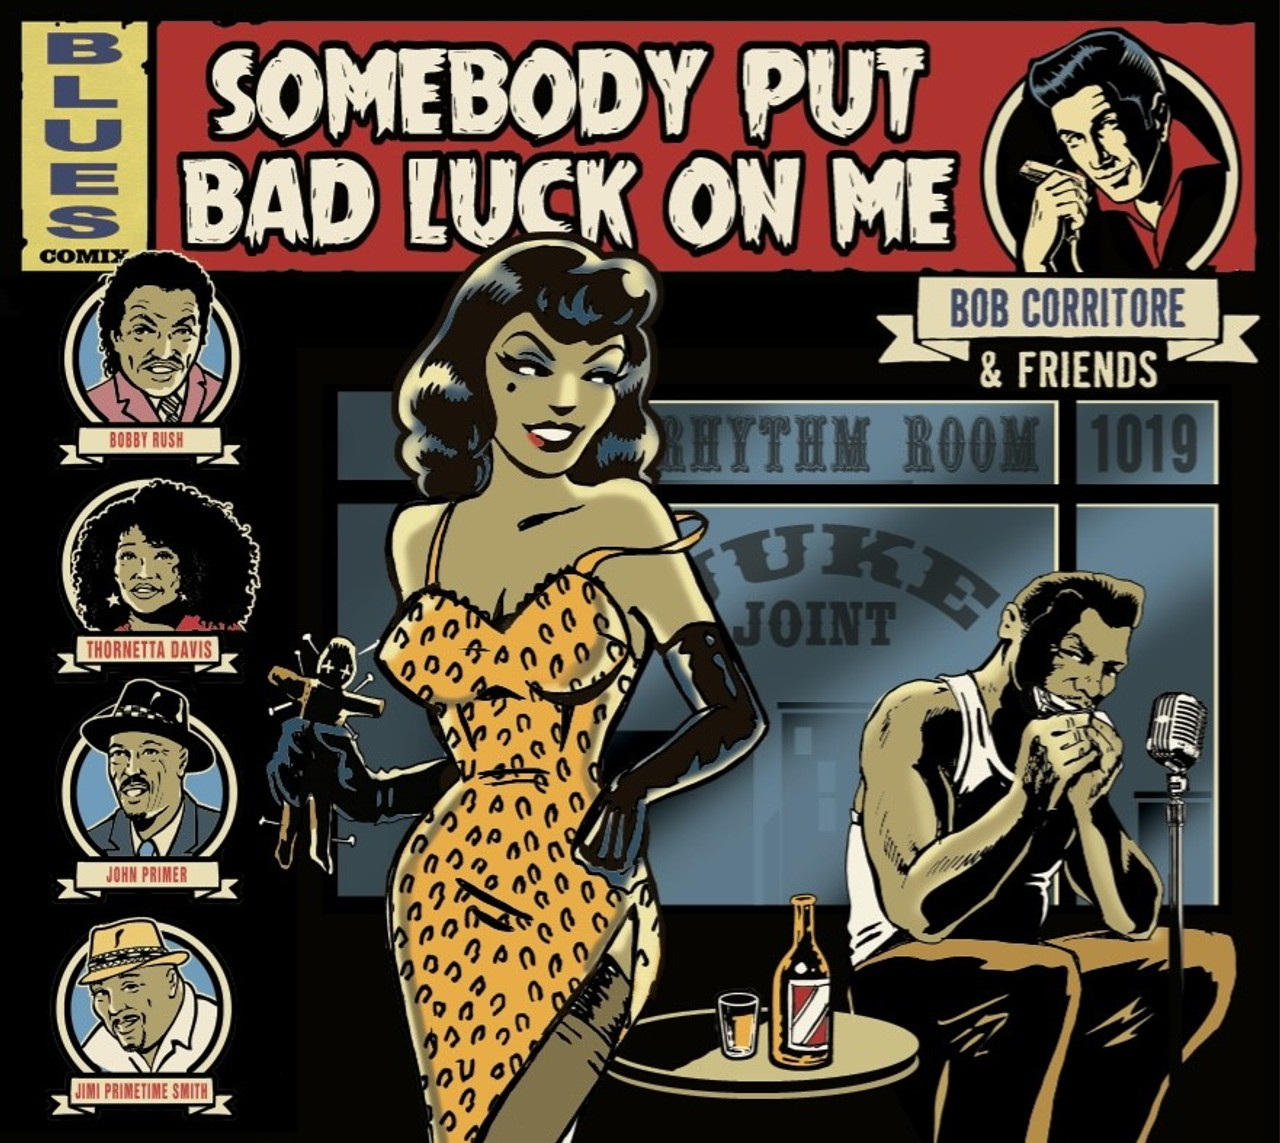 BOB CORRITORE & FRIENDS - SOMEBODY PUT SOME BAD LUCK ON ME